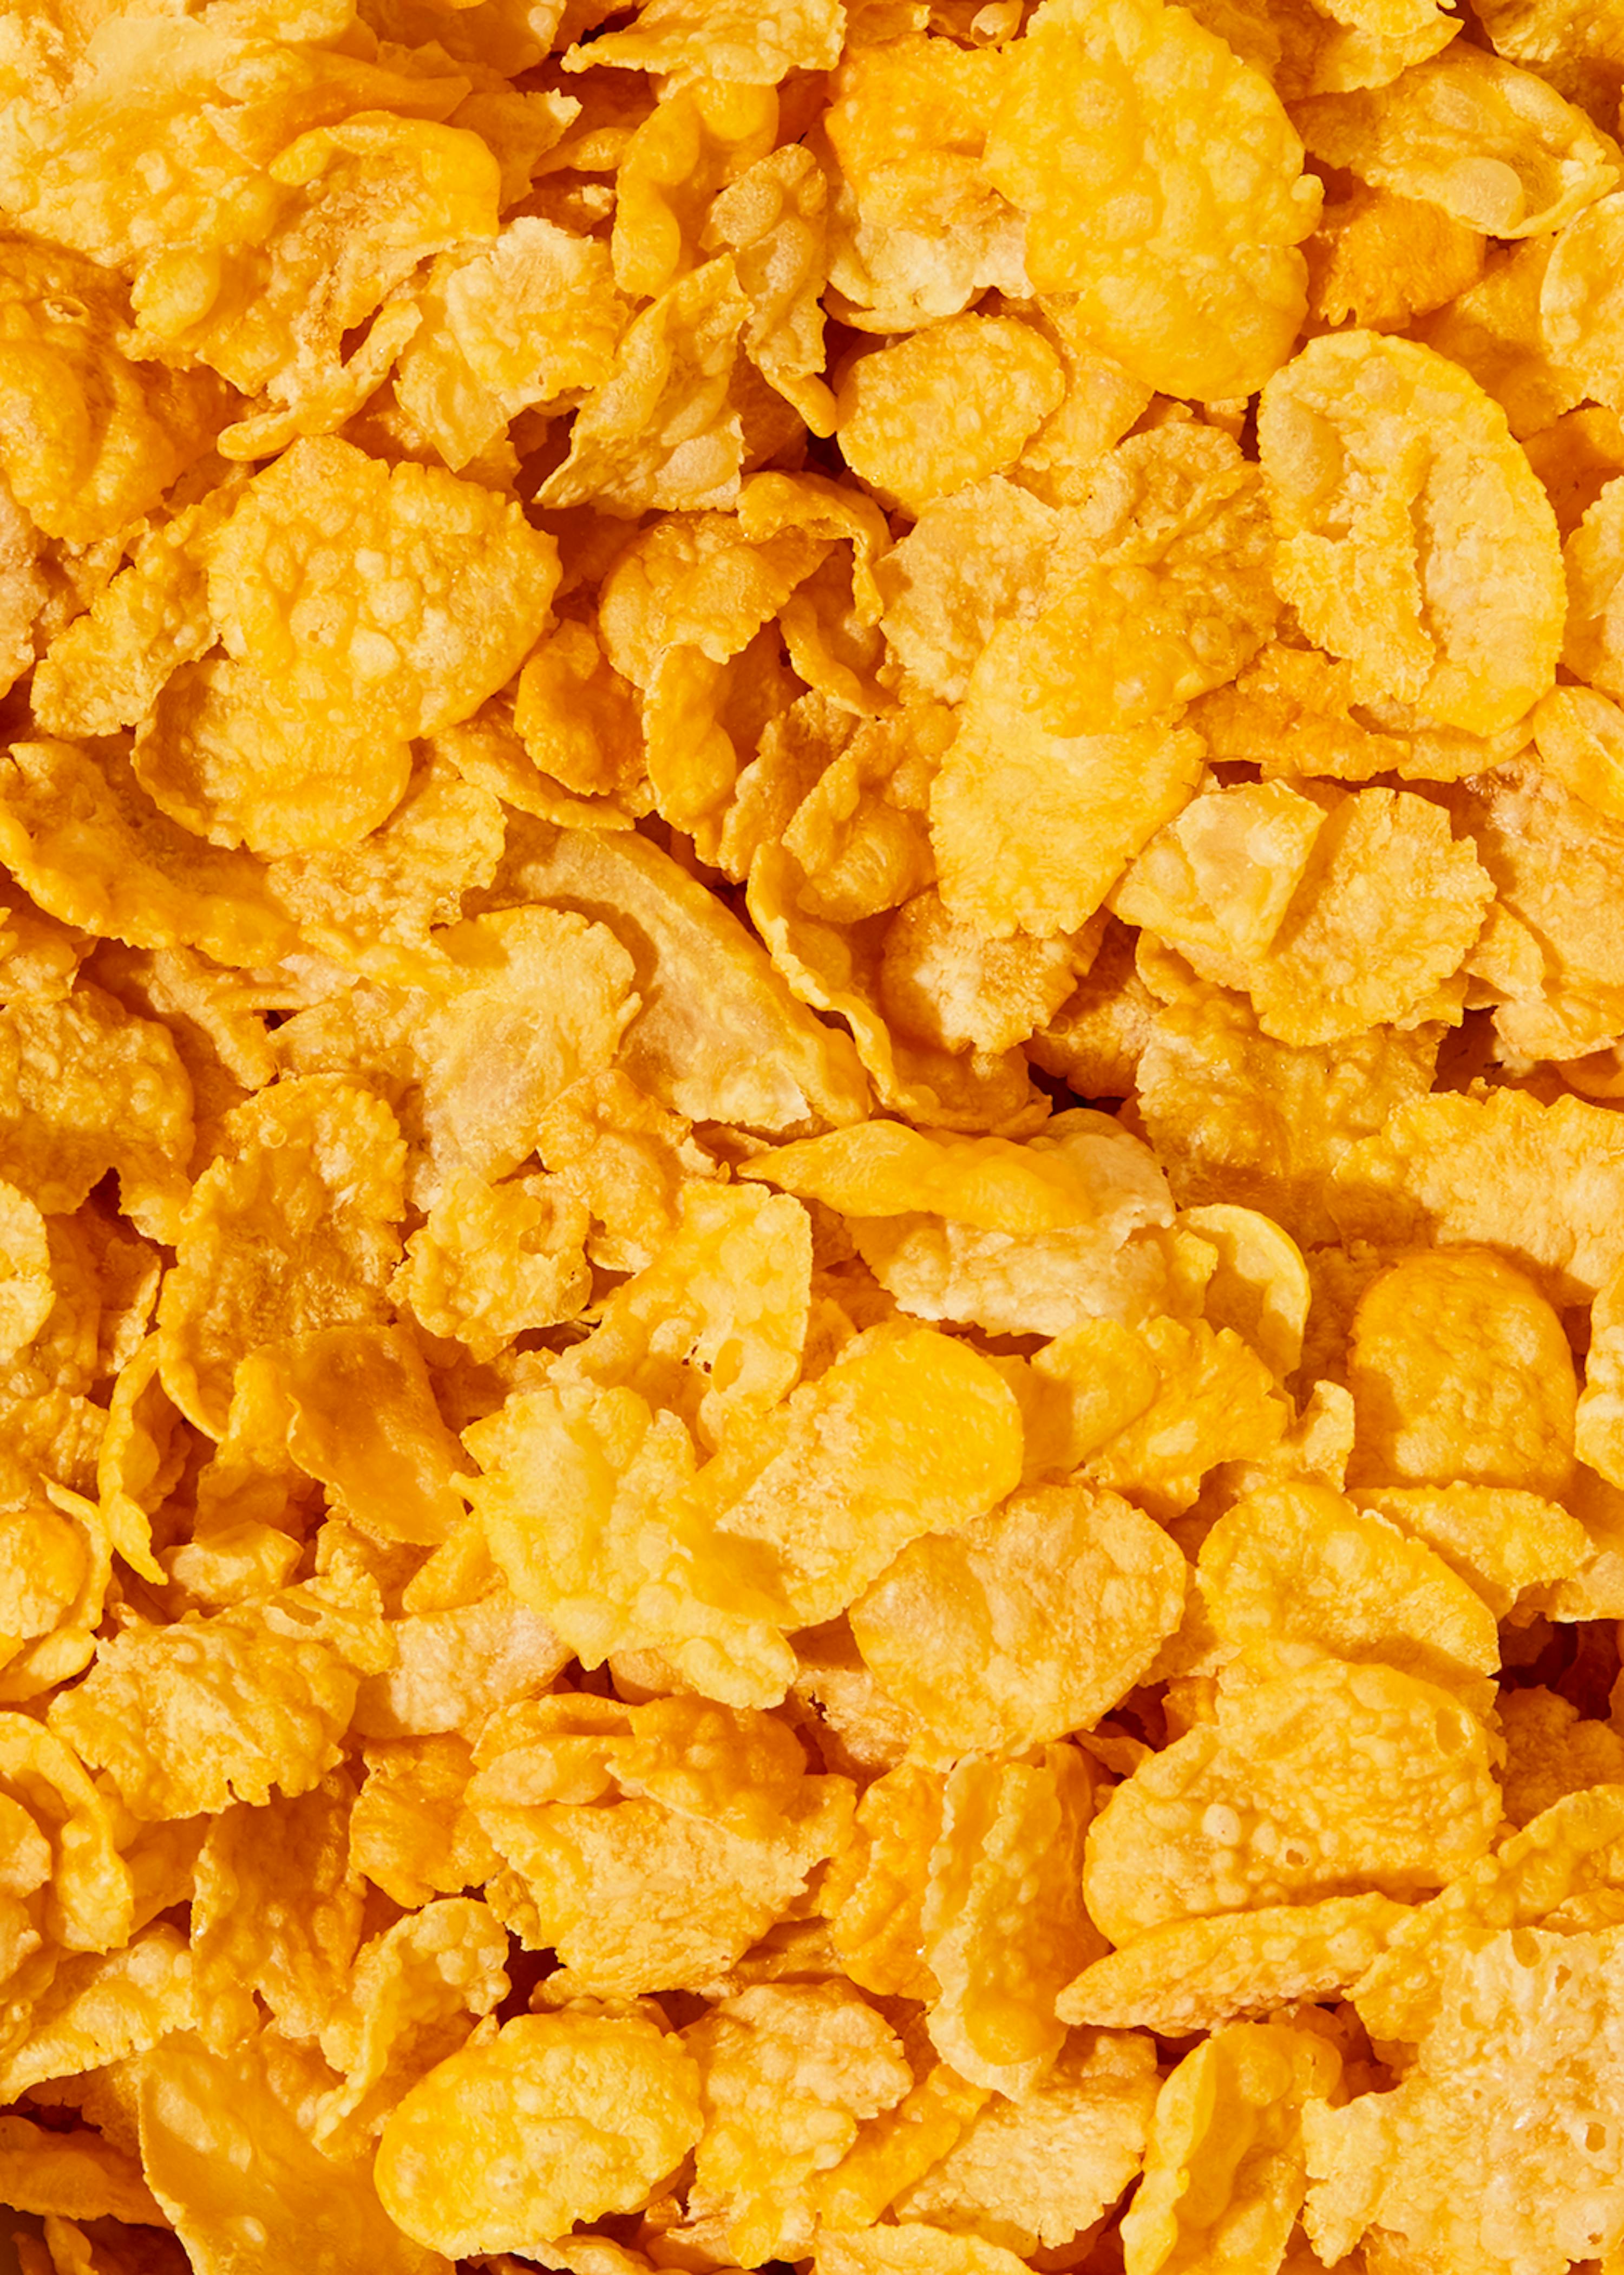 Buy organic cornflakes without added sugar